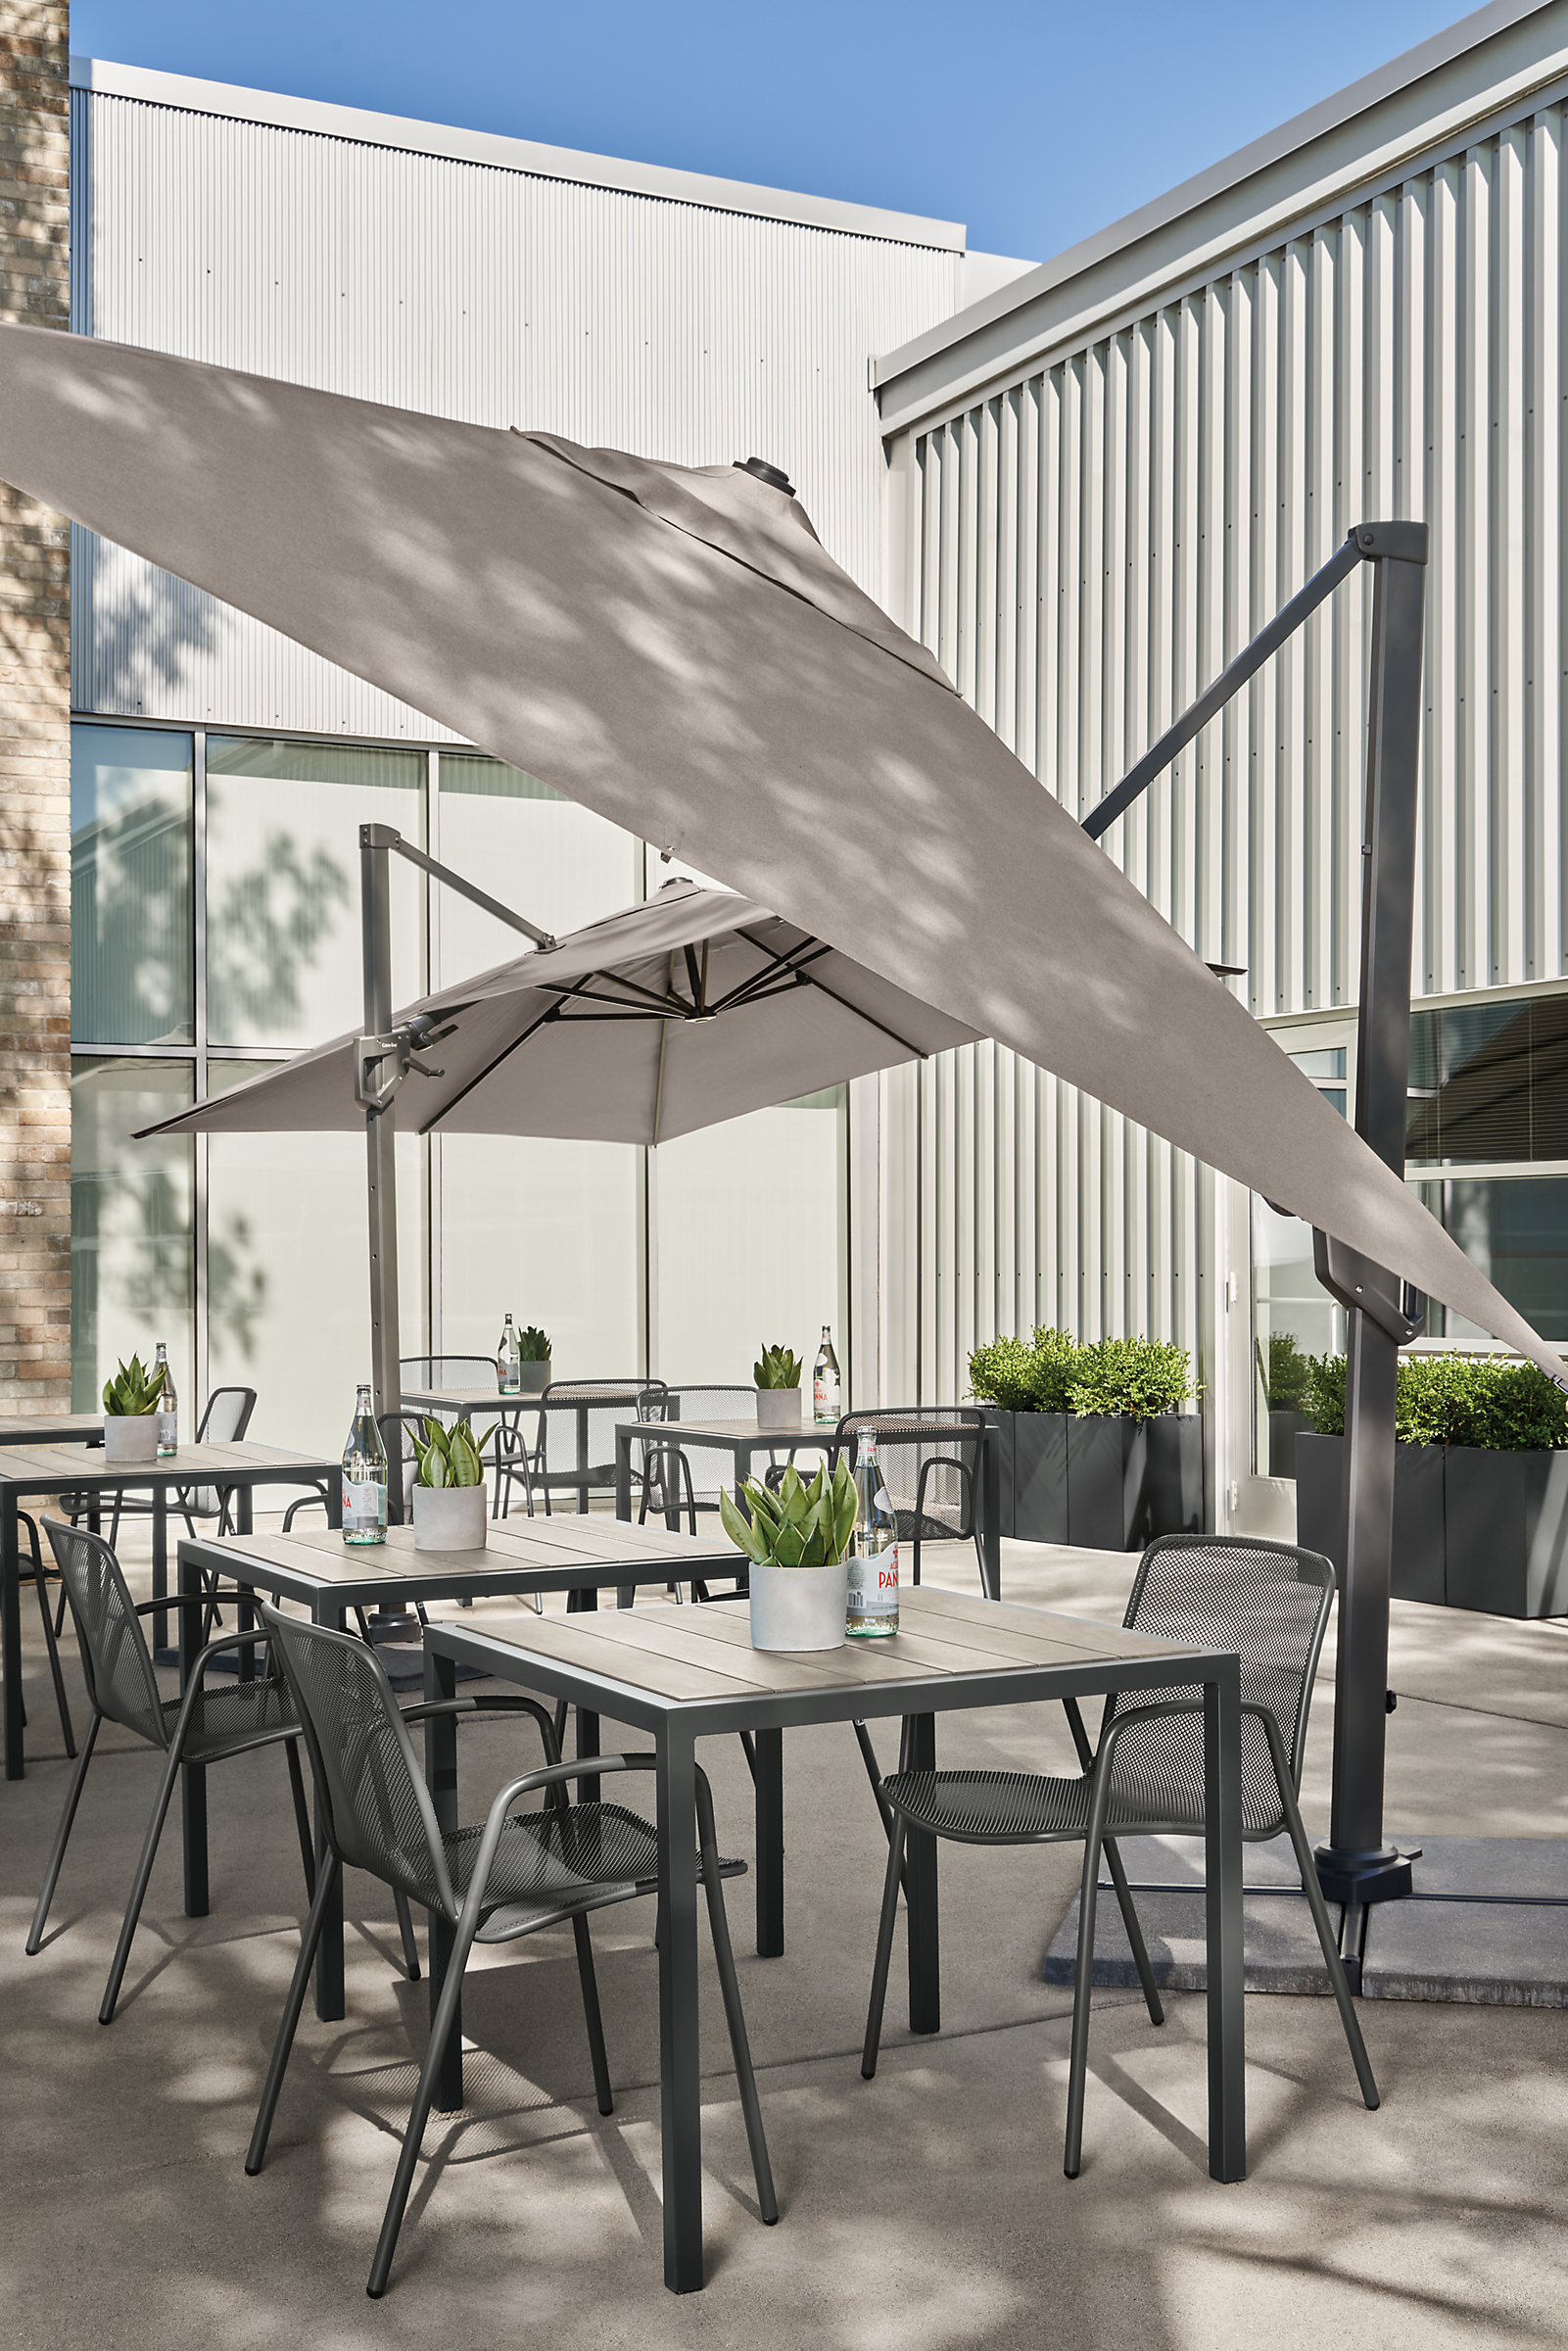 outdoor dining area with alto patio umbrellas tilted, montego tables in aged ash, aruba chairs.